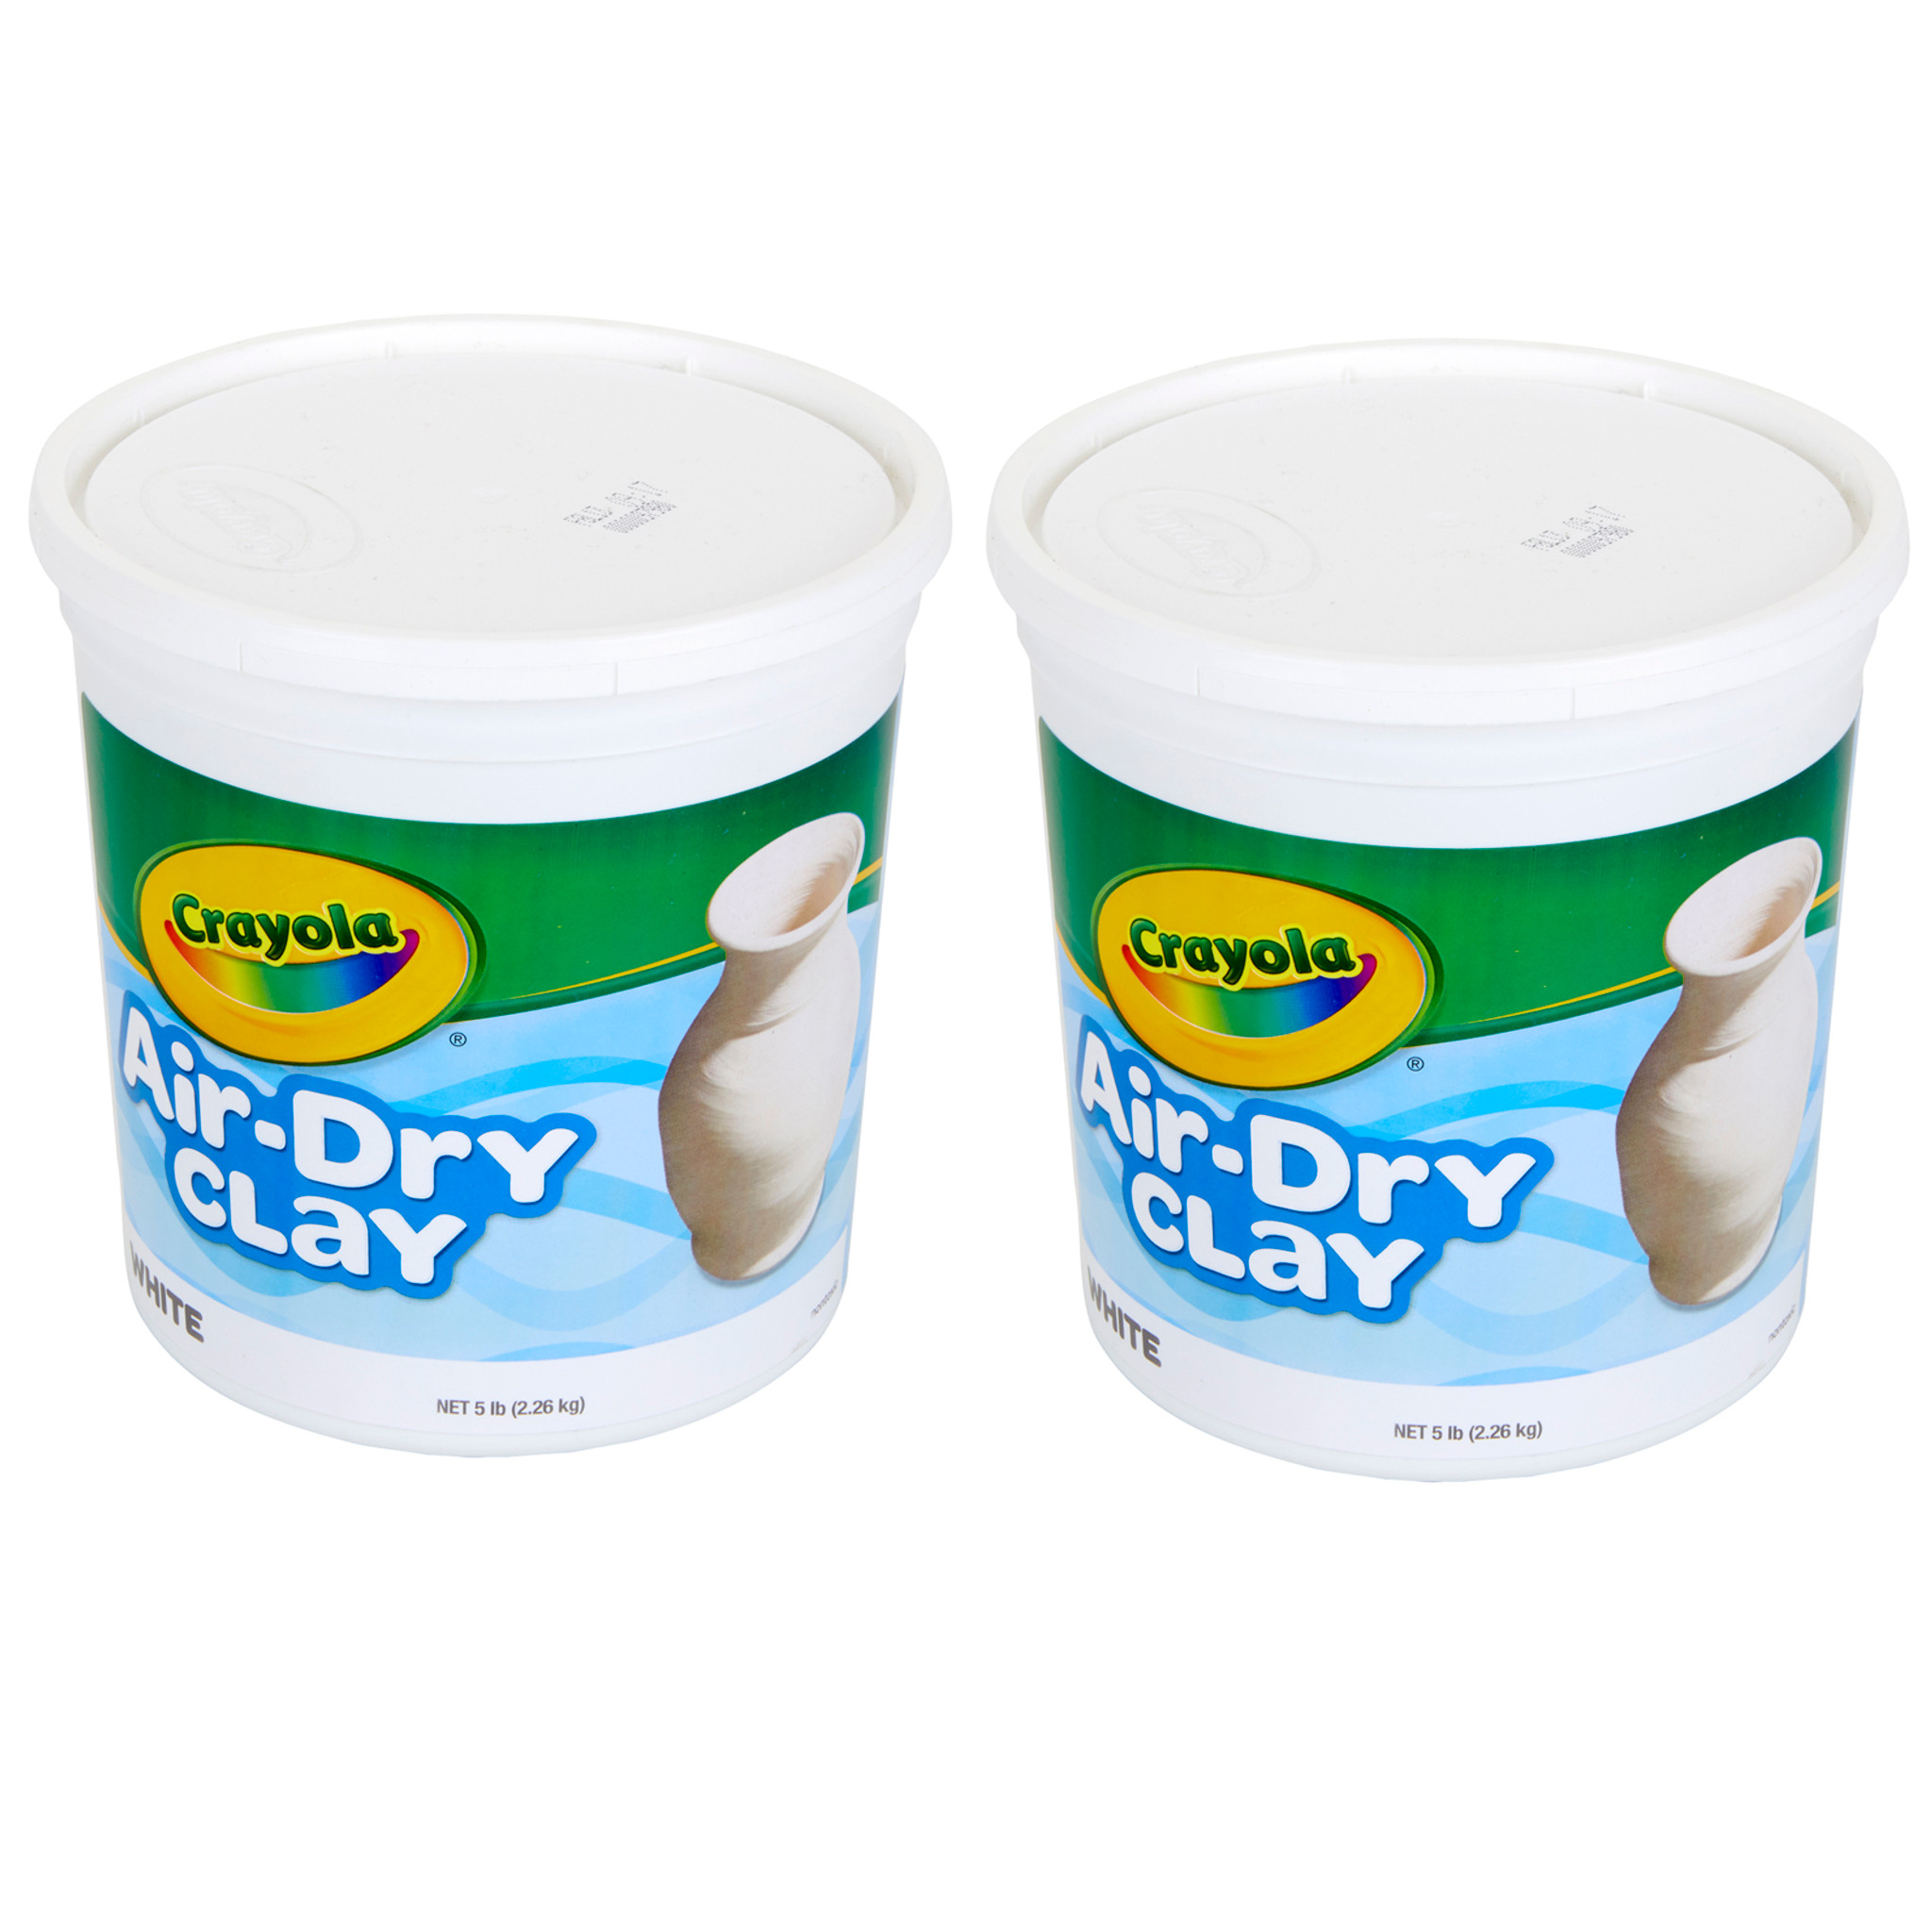 4 Crayola Air Dry Clay 2.5lb Buckets - 10lbs in Total